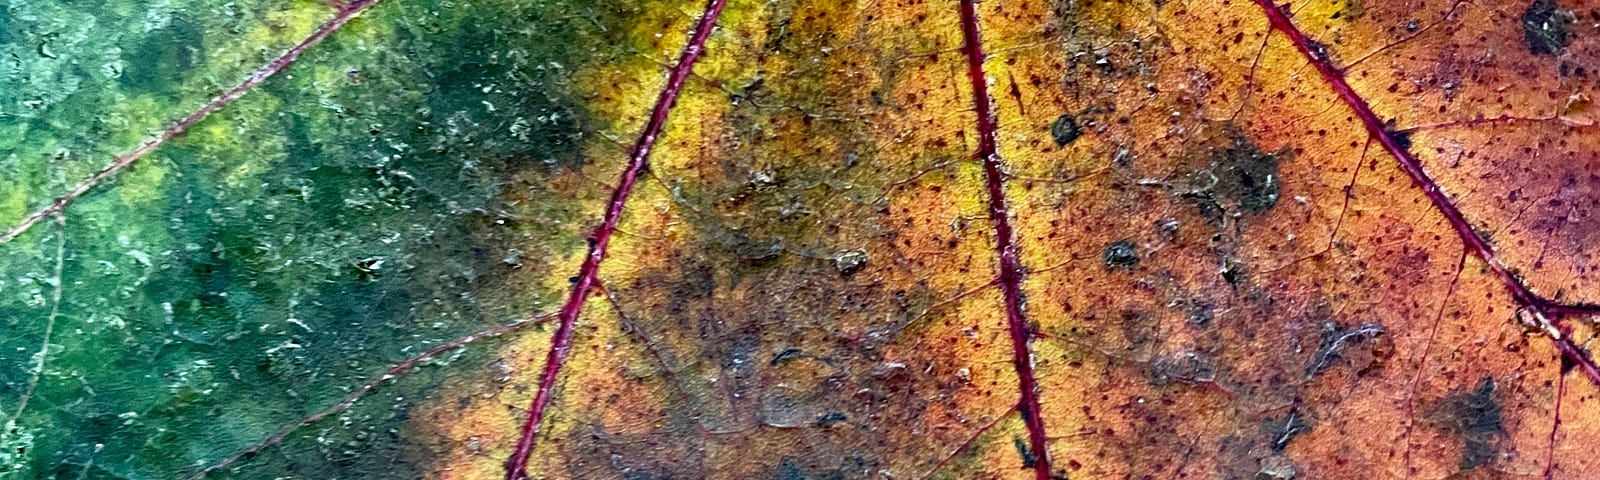 Closeup of maple leaf, inverted, with red vascular structure and leaf shades in yellow, brown, and green.